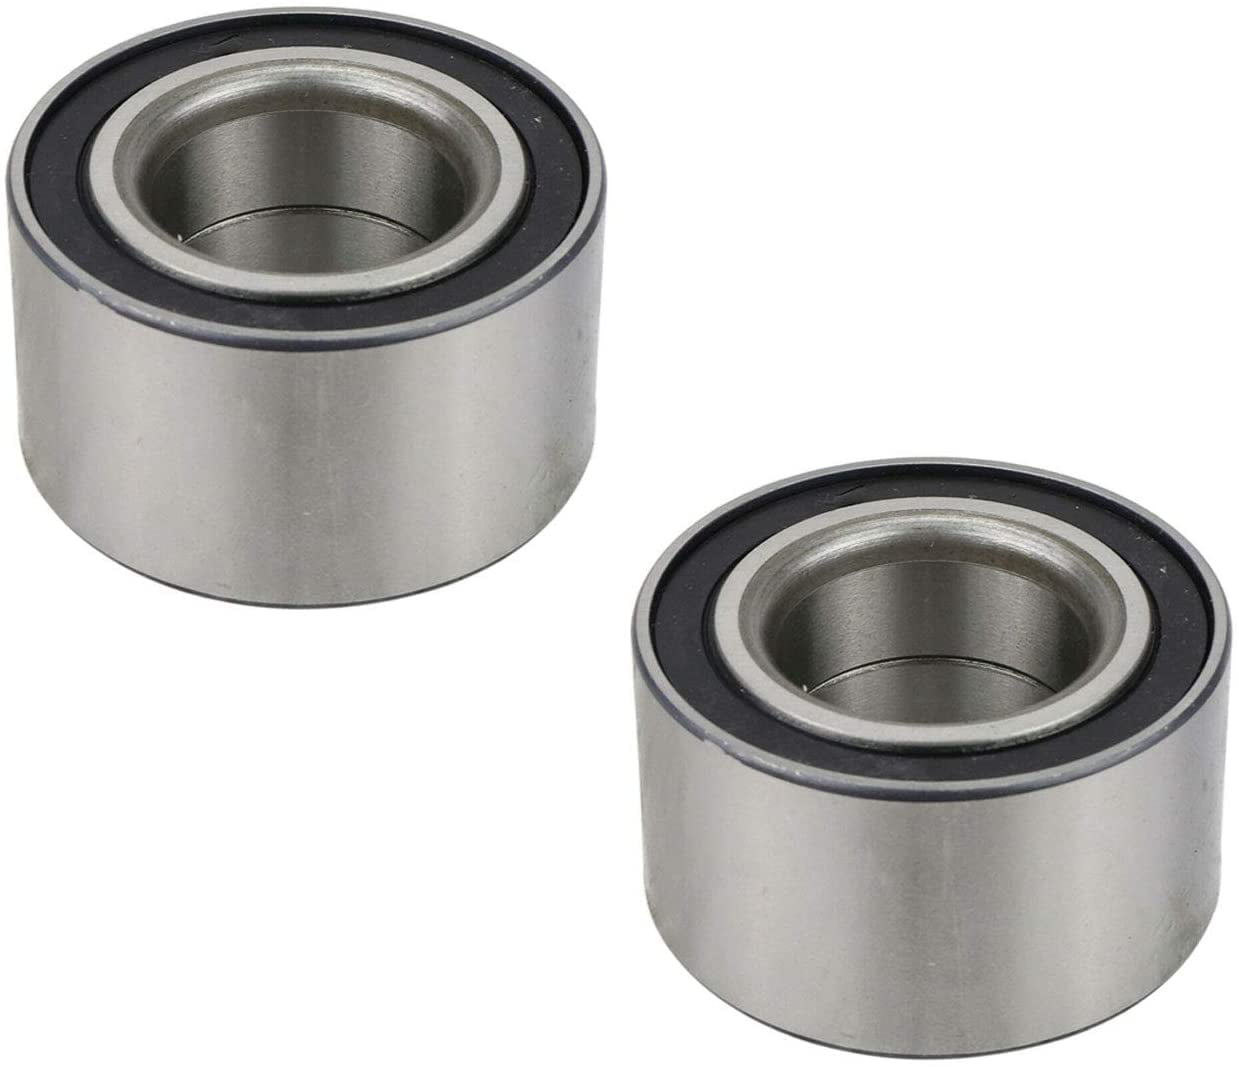 New HQ Powersports Rear Wheel Bearings Replacement For Honda TRX250TE Recon 250cc 2002-2018 